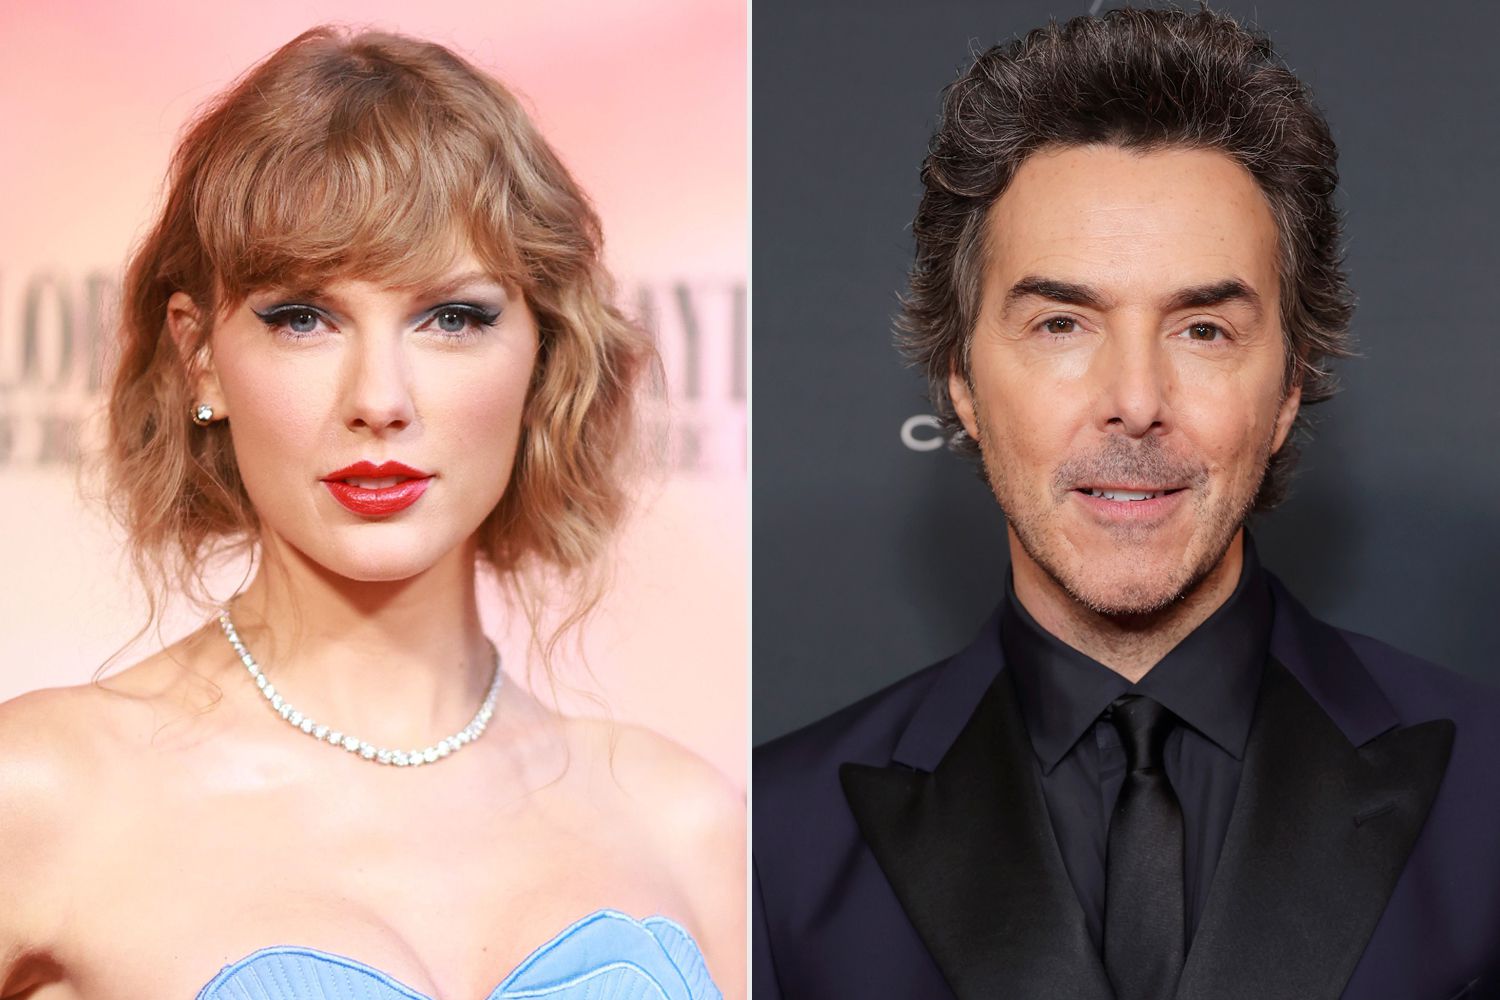 Director Shawn Levy Reveals His Favorite Taylor Swift Song